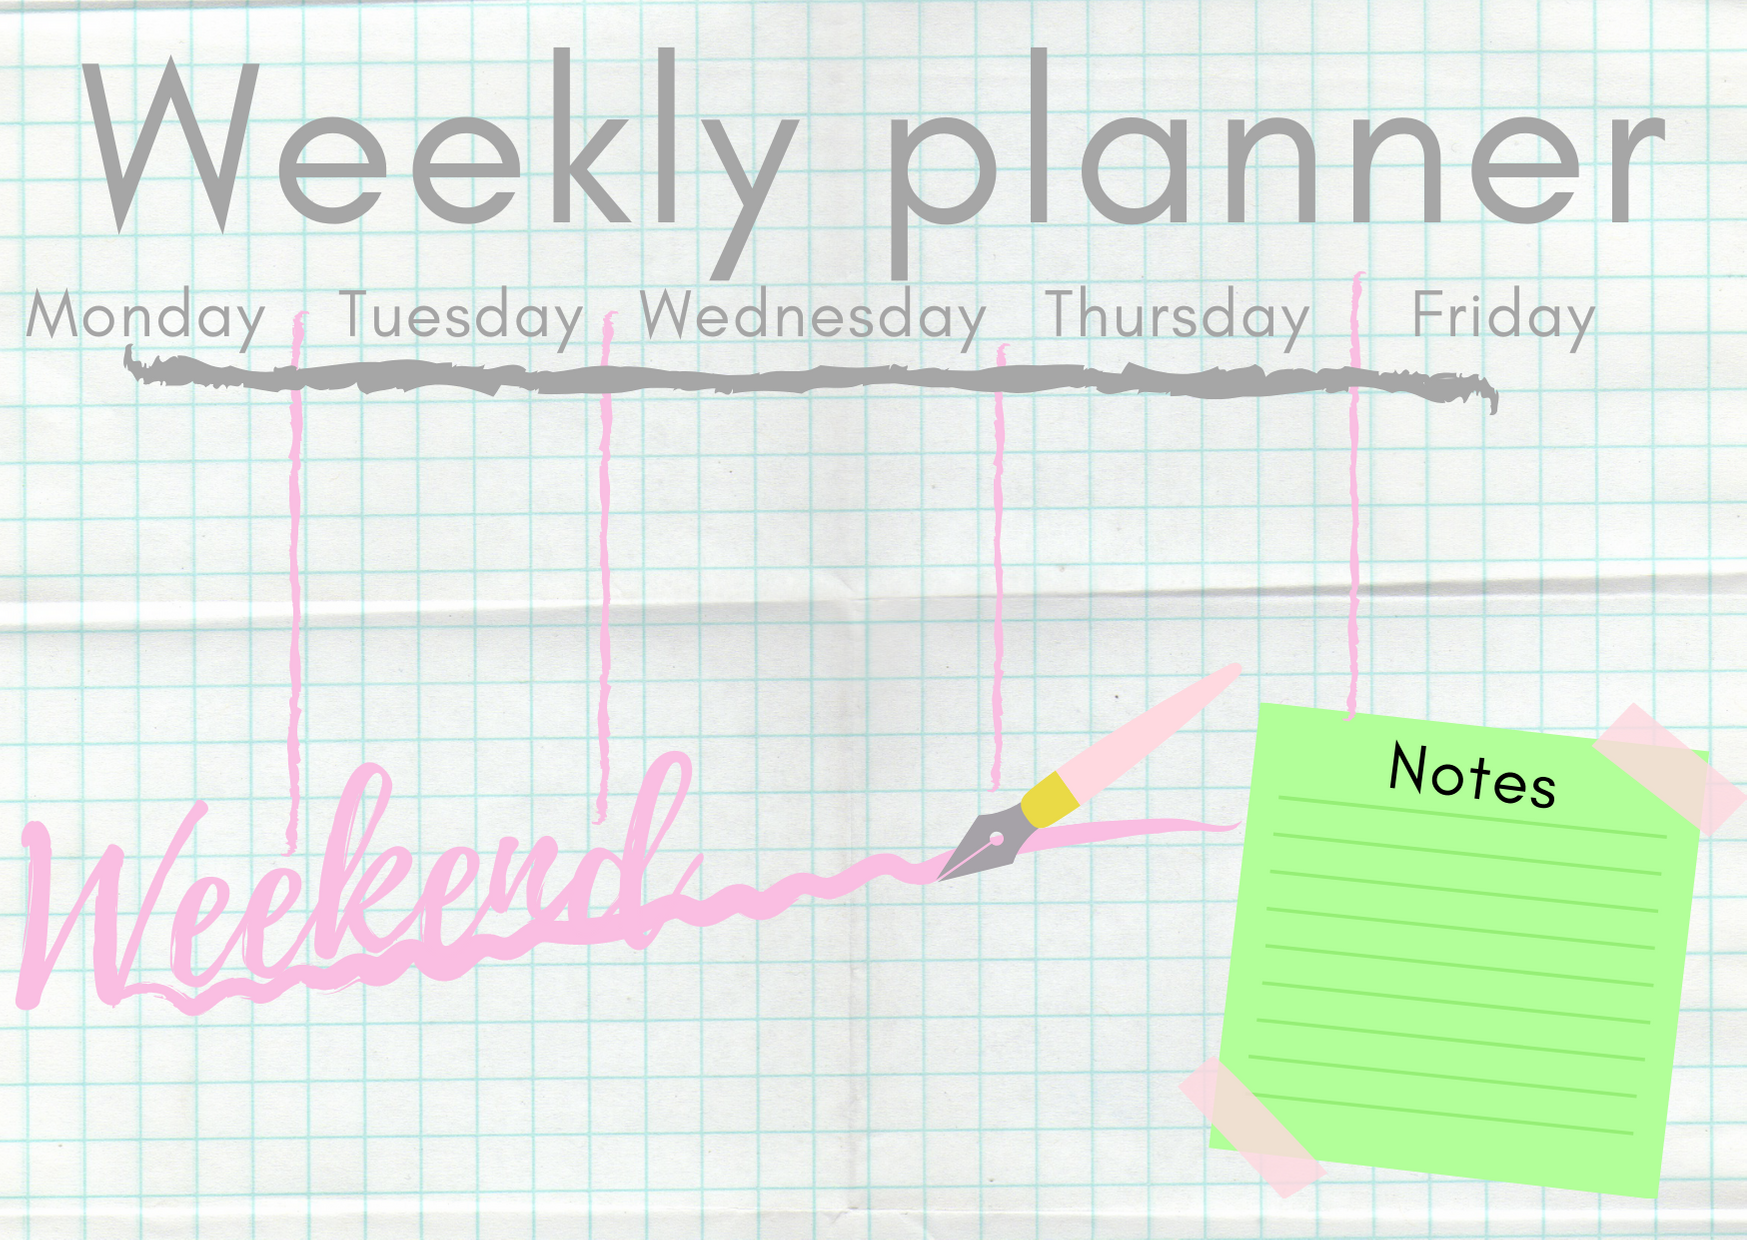 Weekly plannerpng